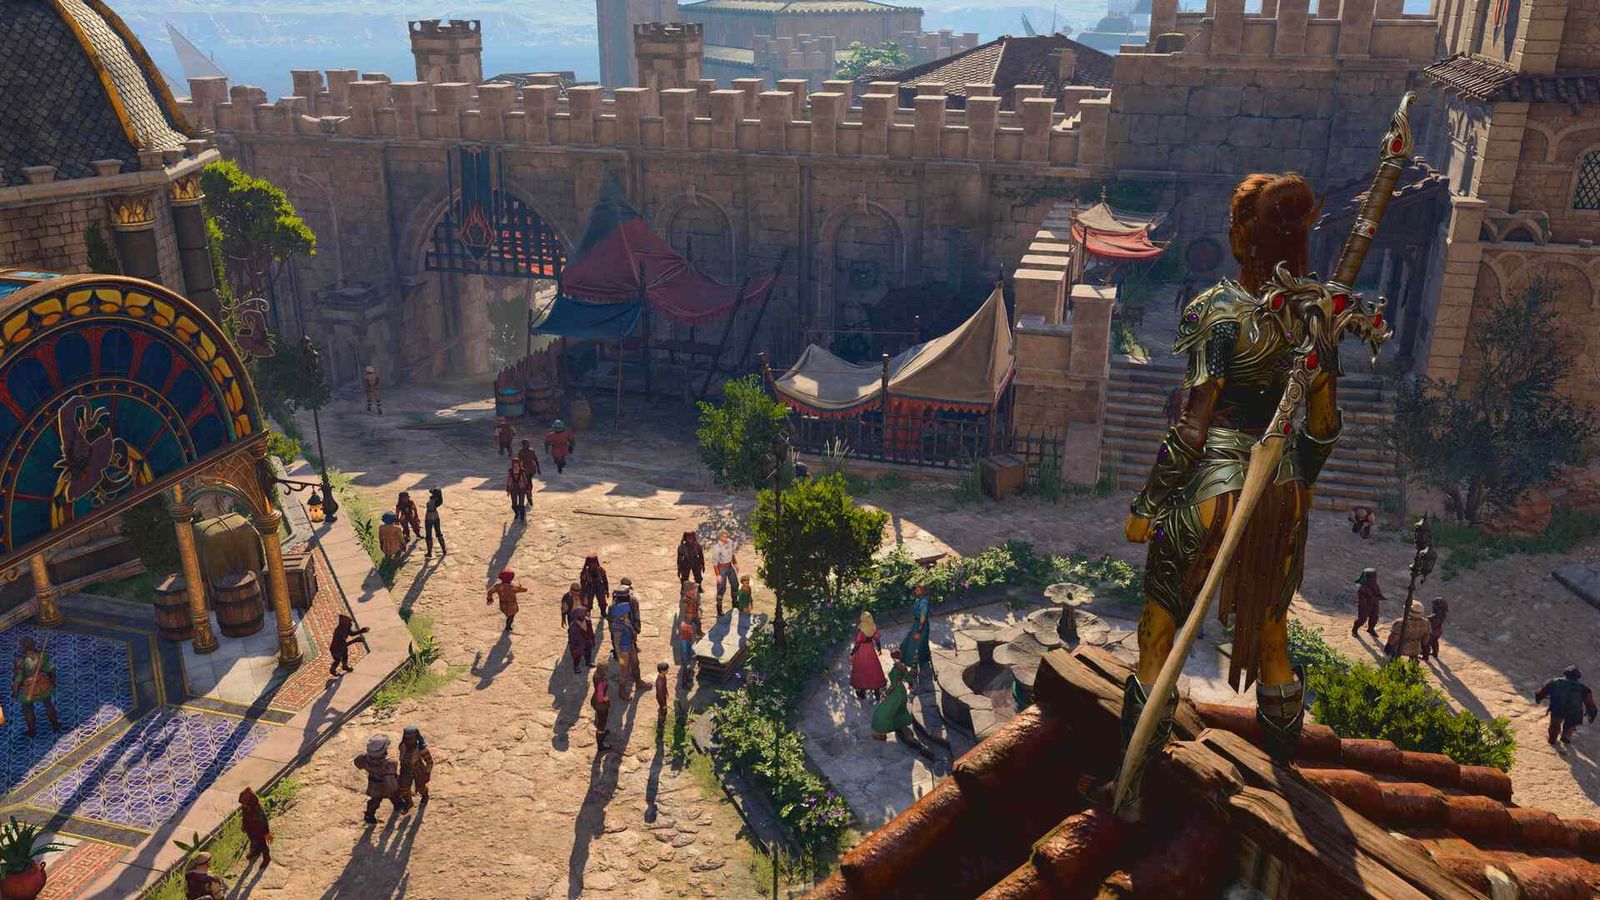 The player character looking across a city in Baldur's Gate 3.